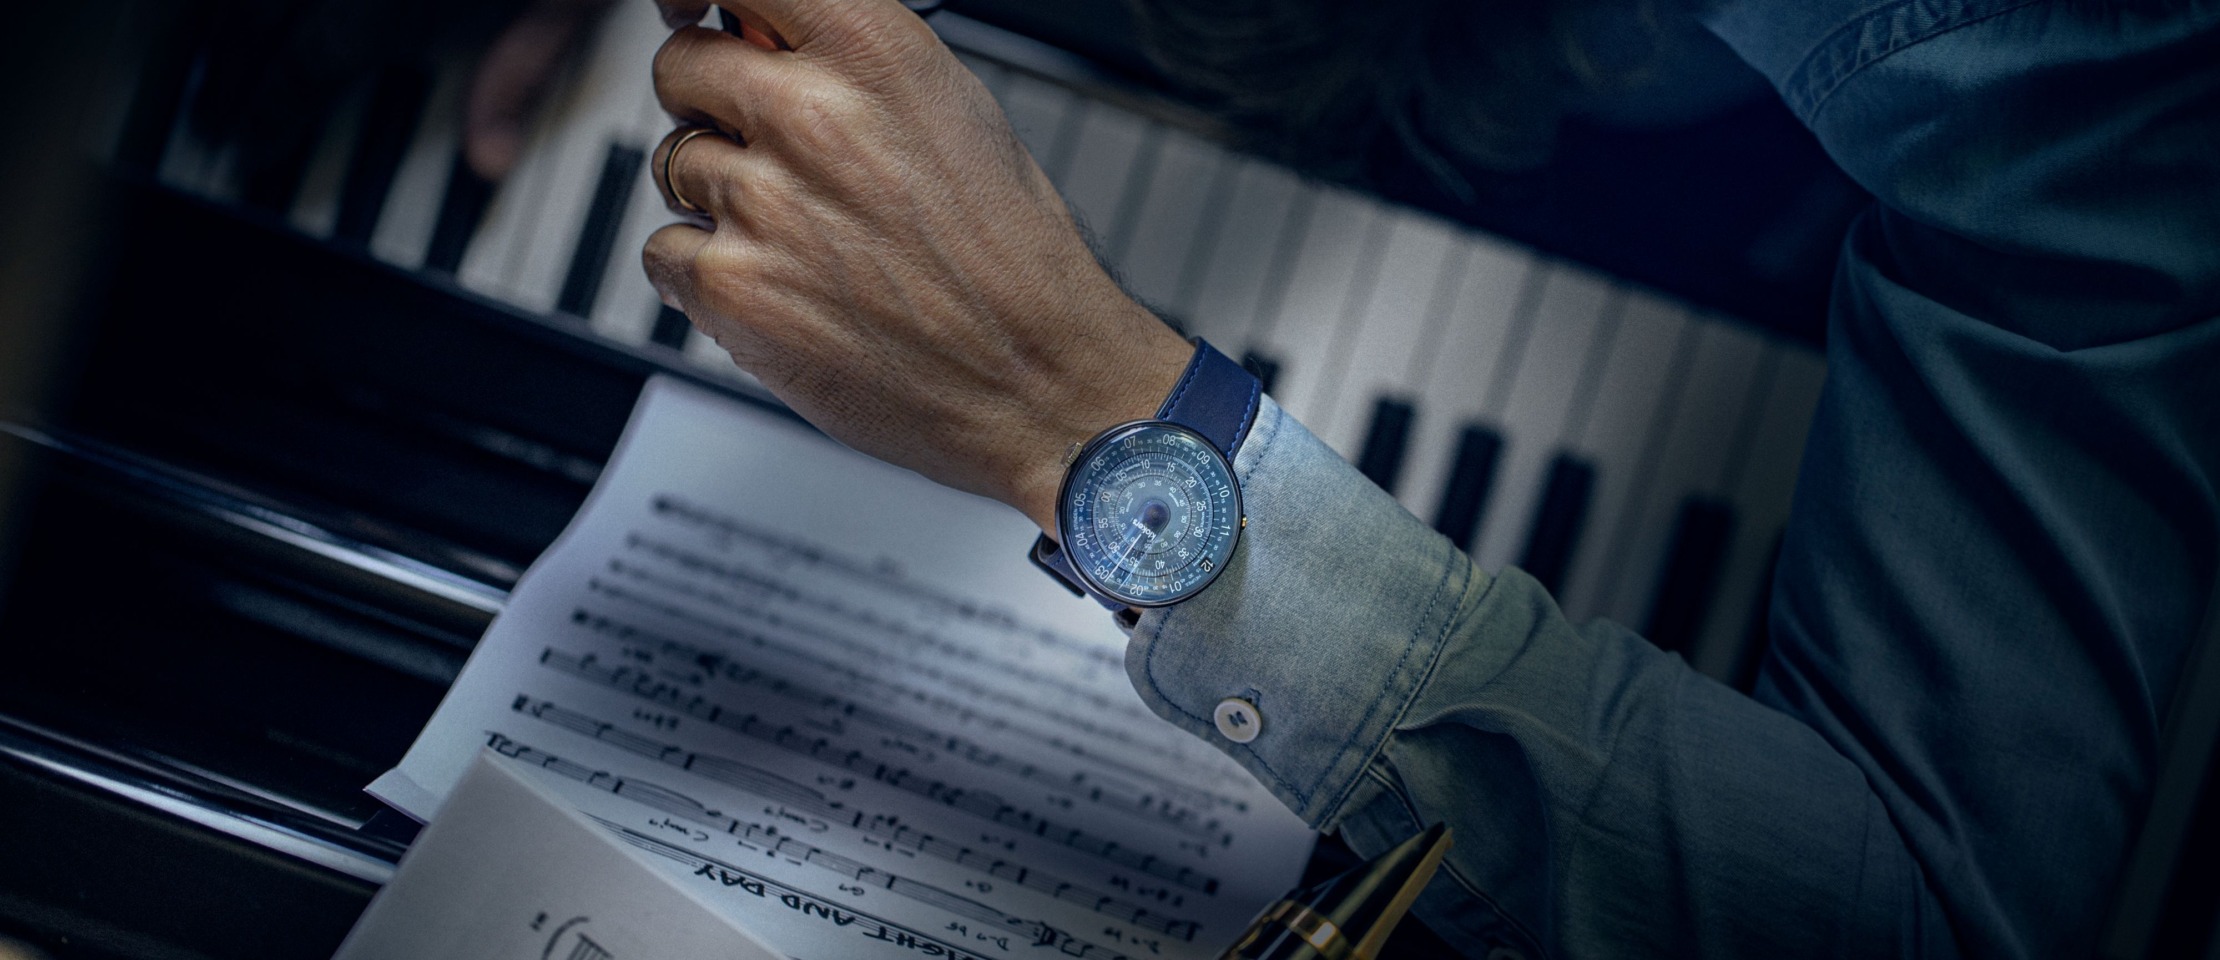 Watches from Klokers – The modern interpretation of the slide rule on your wrist